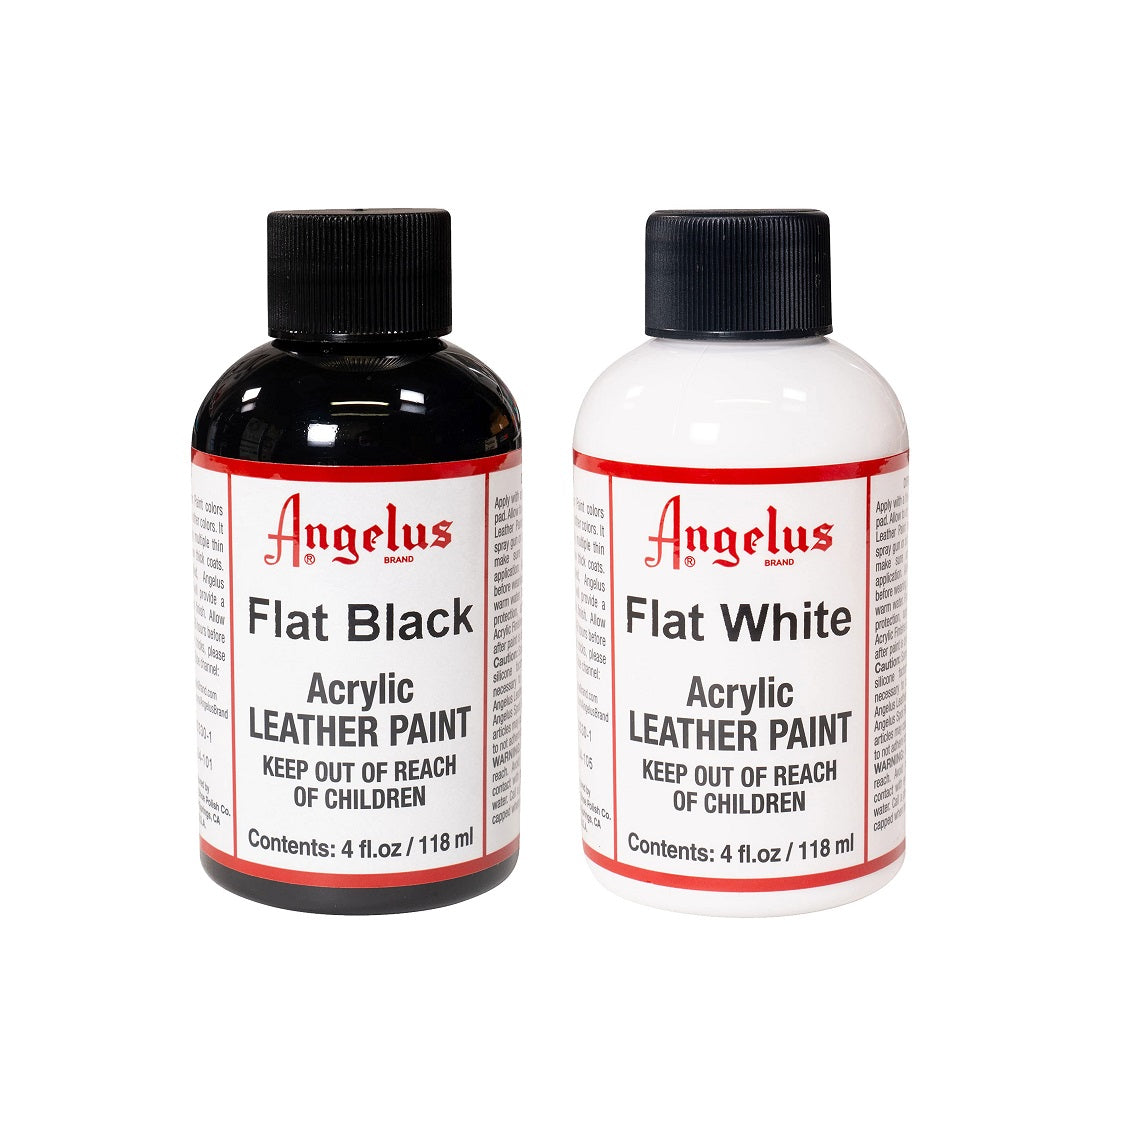 Angelus Acrylic Leather Paint Collector Edition 1oz White Cement